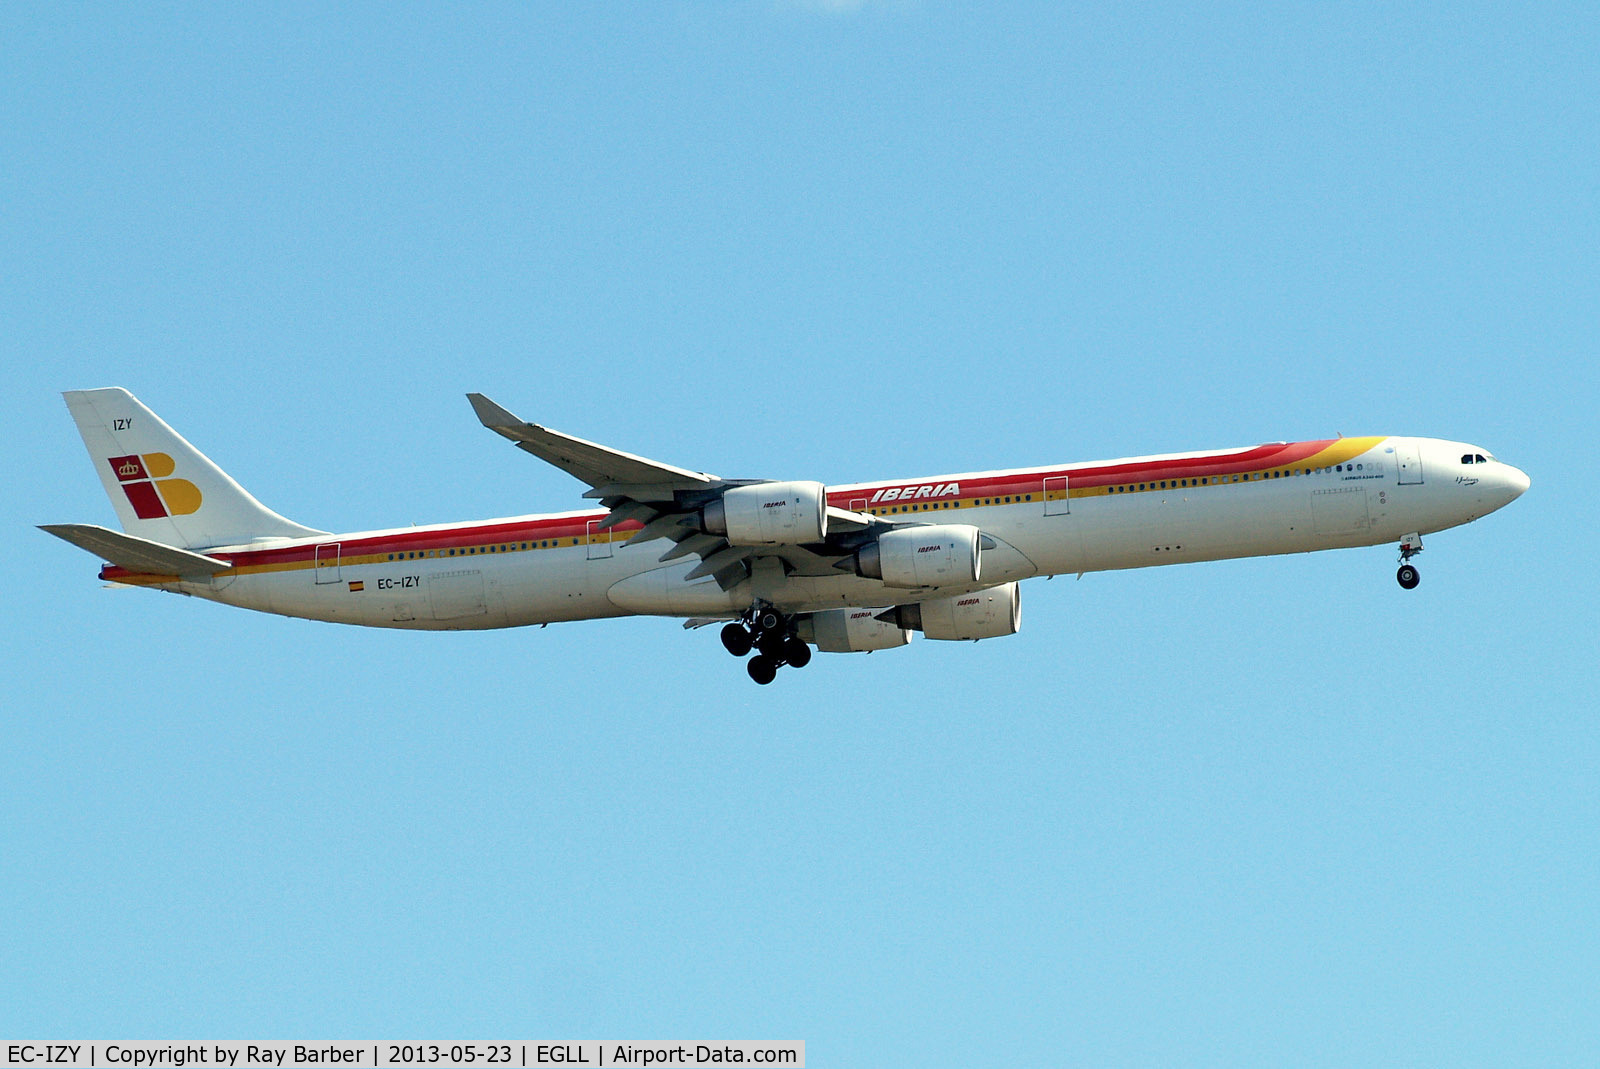 EC-IZY, 2004 Airbus A340-642 C/N 604, Airbus A340-642 [604] (Iberia) Home~G 23/05/2013 On approach 27L.